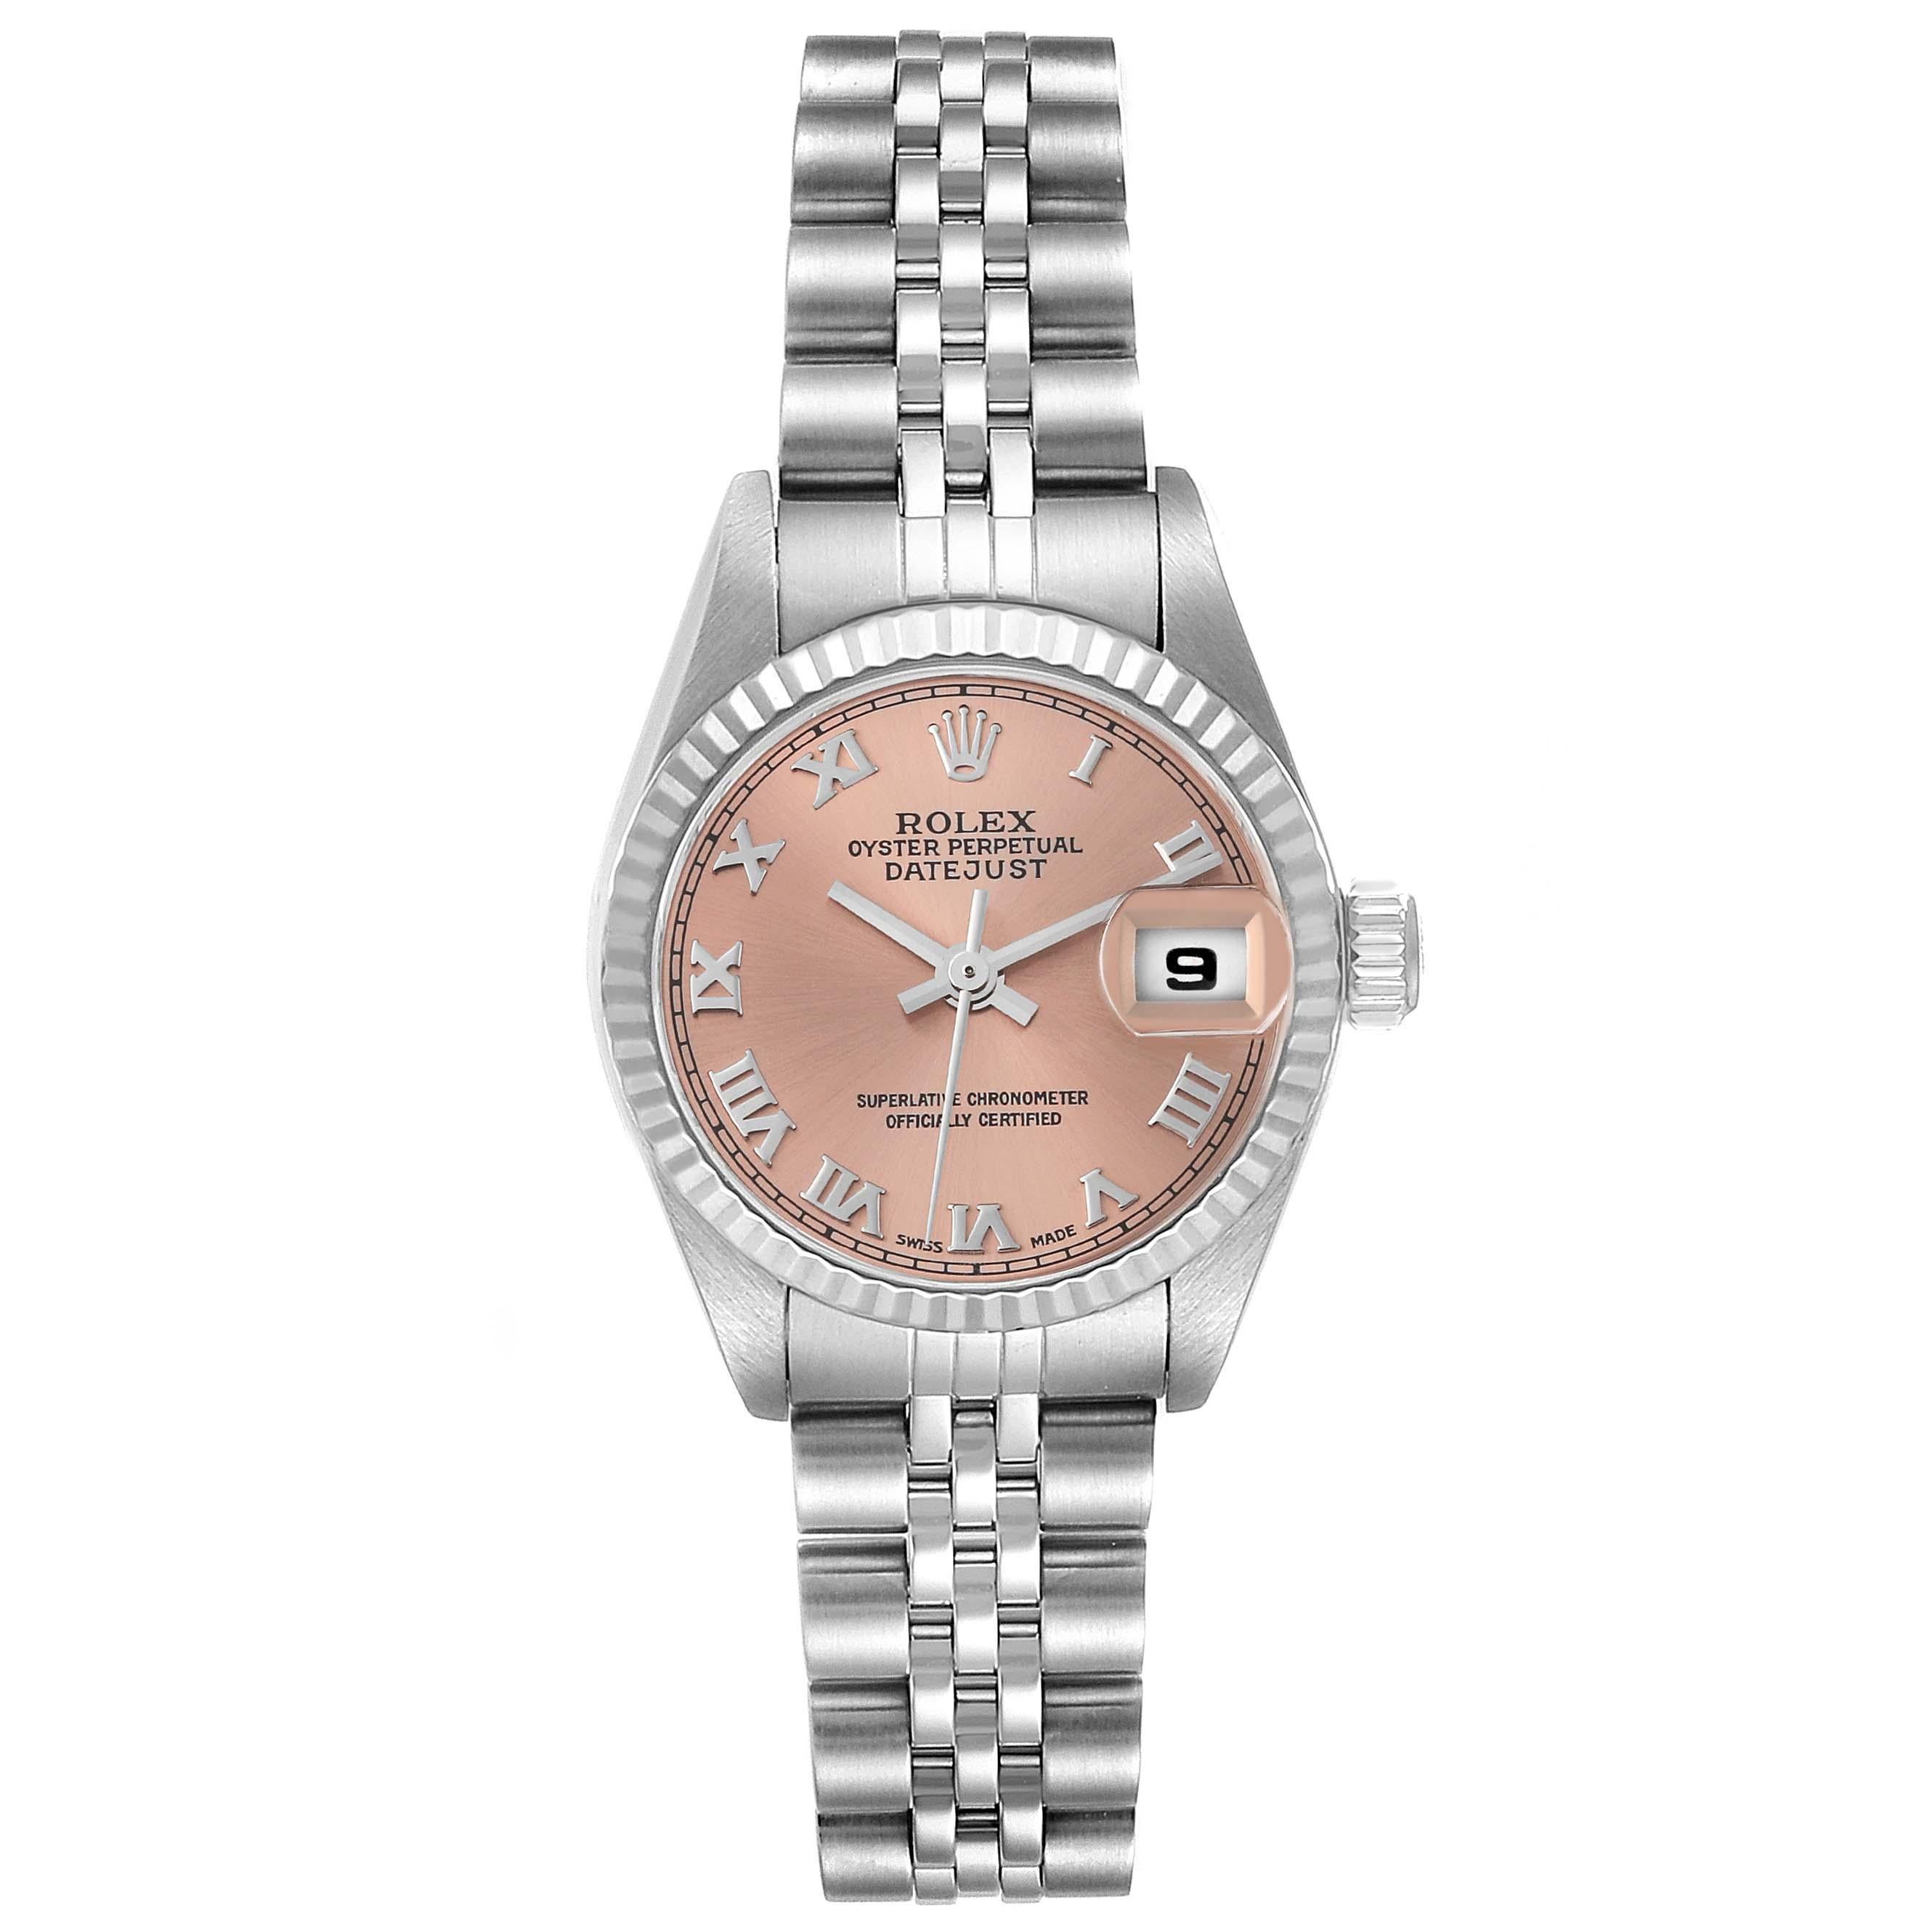 Rolex Datejust Salmon Dial White Gold Steel Ladies Watch 79174. Officially certified chronometer automatic self-winding movement. Stainless steel oyster case 26.0 mm in diameter. Rolex logo on the crown. 18K white gold fluted bezel. Scratch